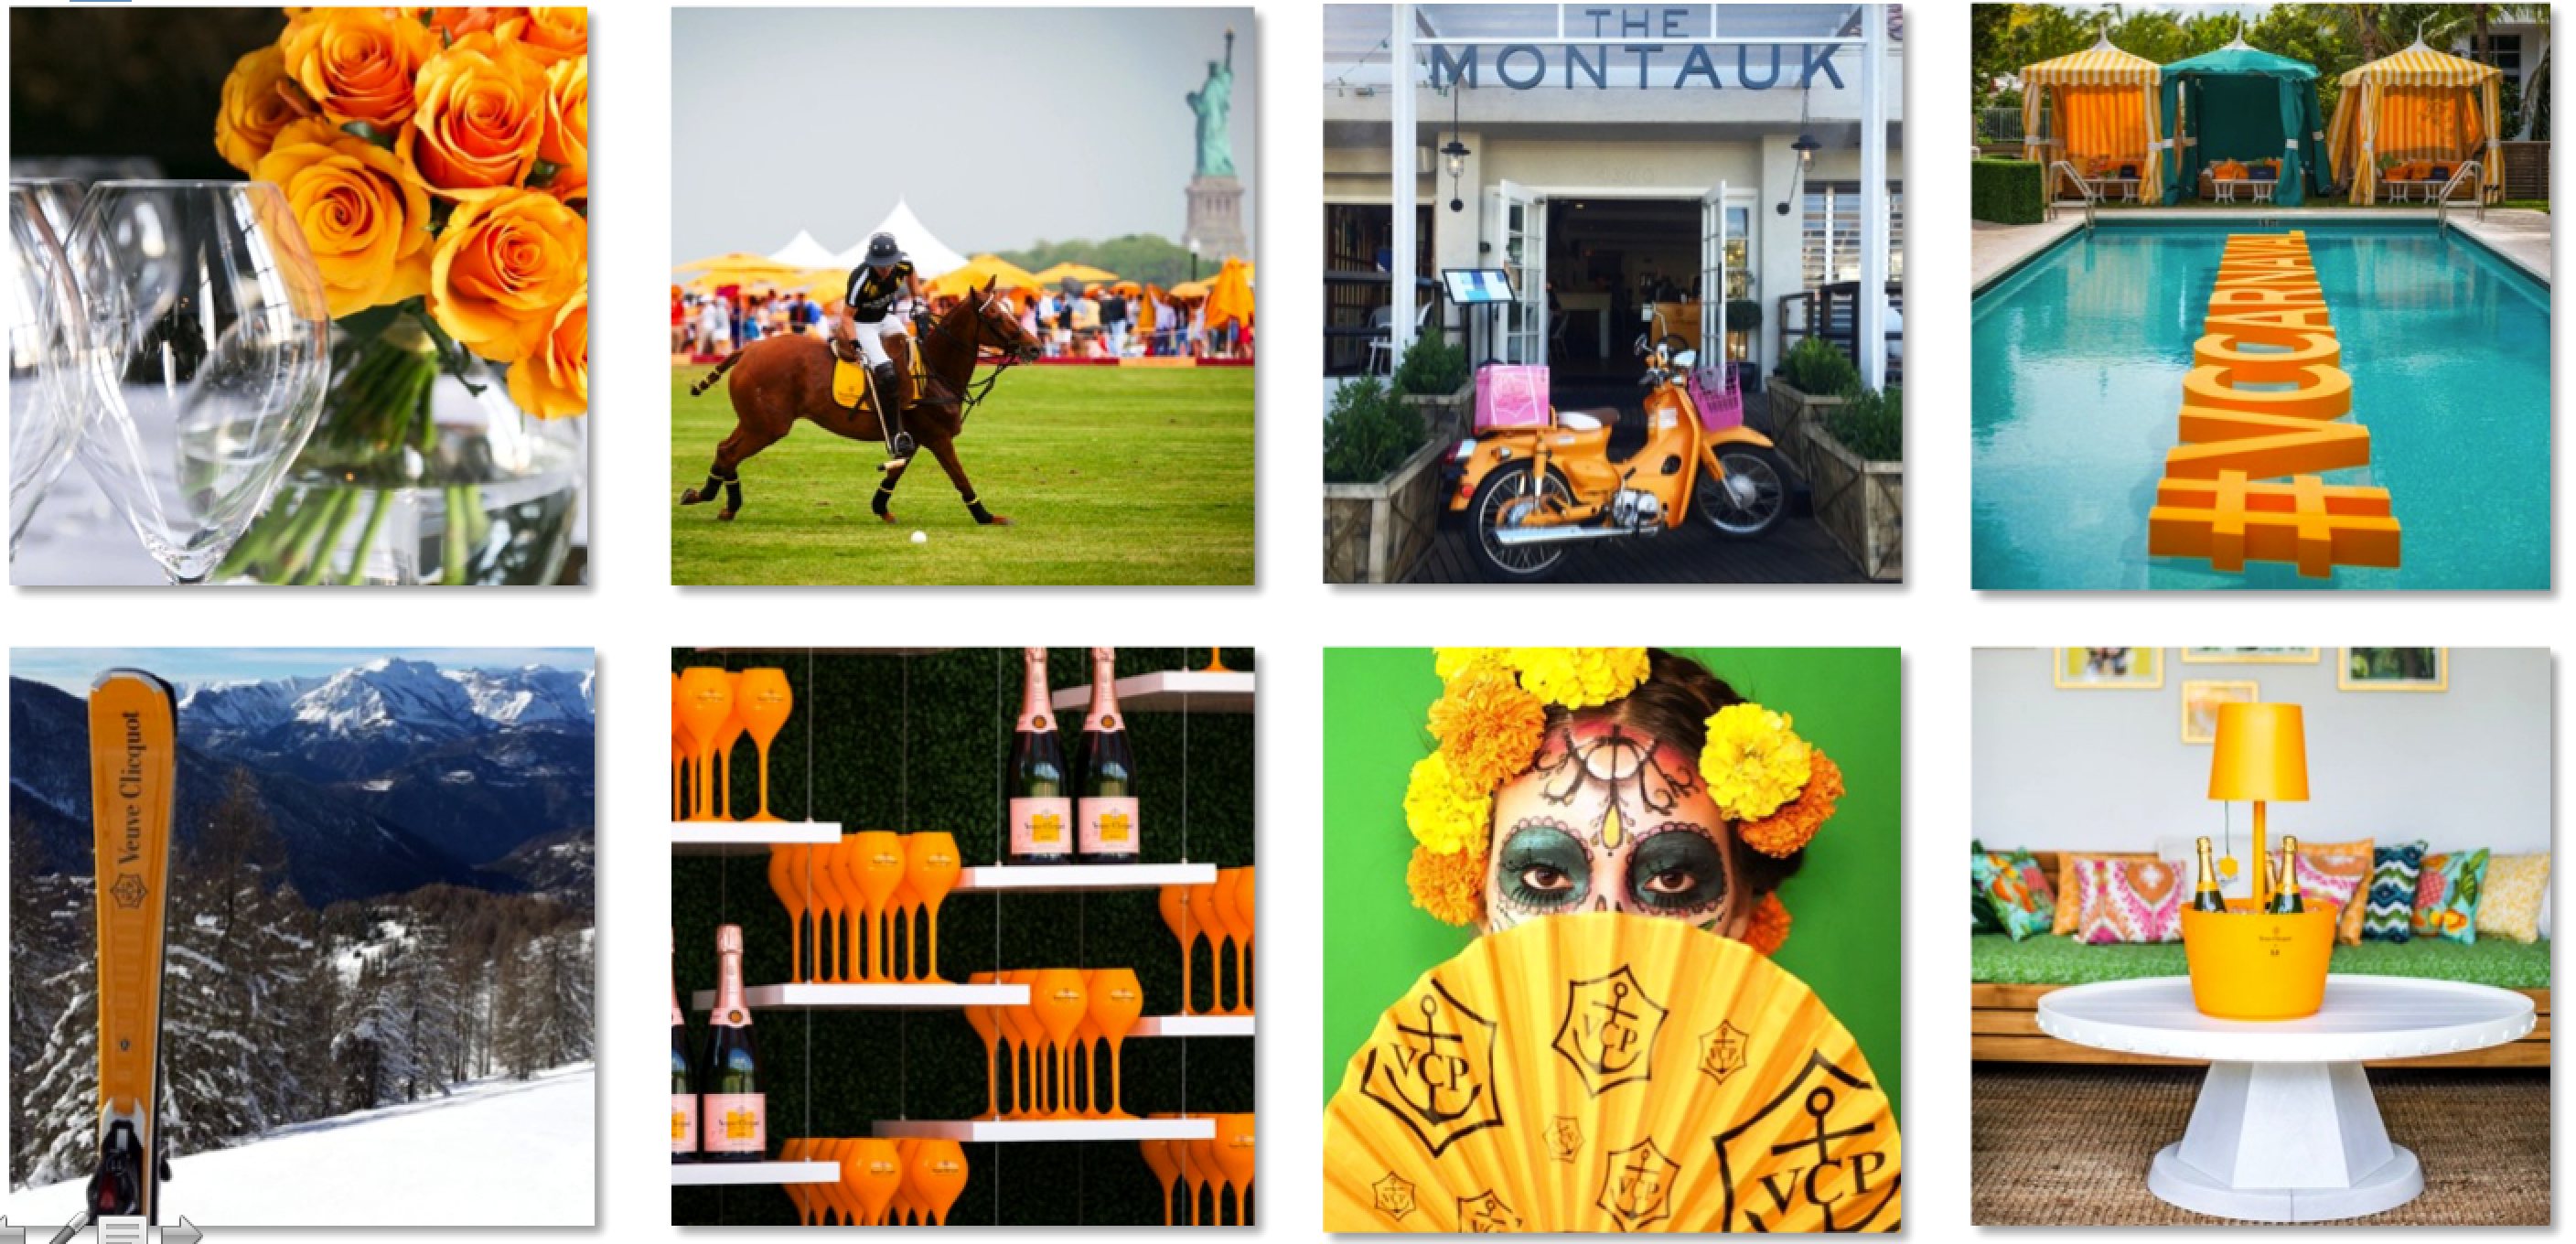 Who doesn’t want their own Pantone Color? Veuve Cliquot Yellow is Pantone 137.